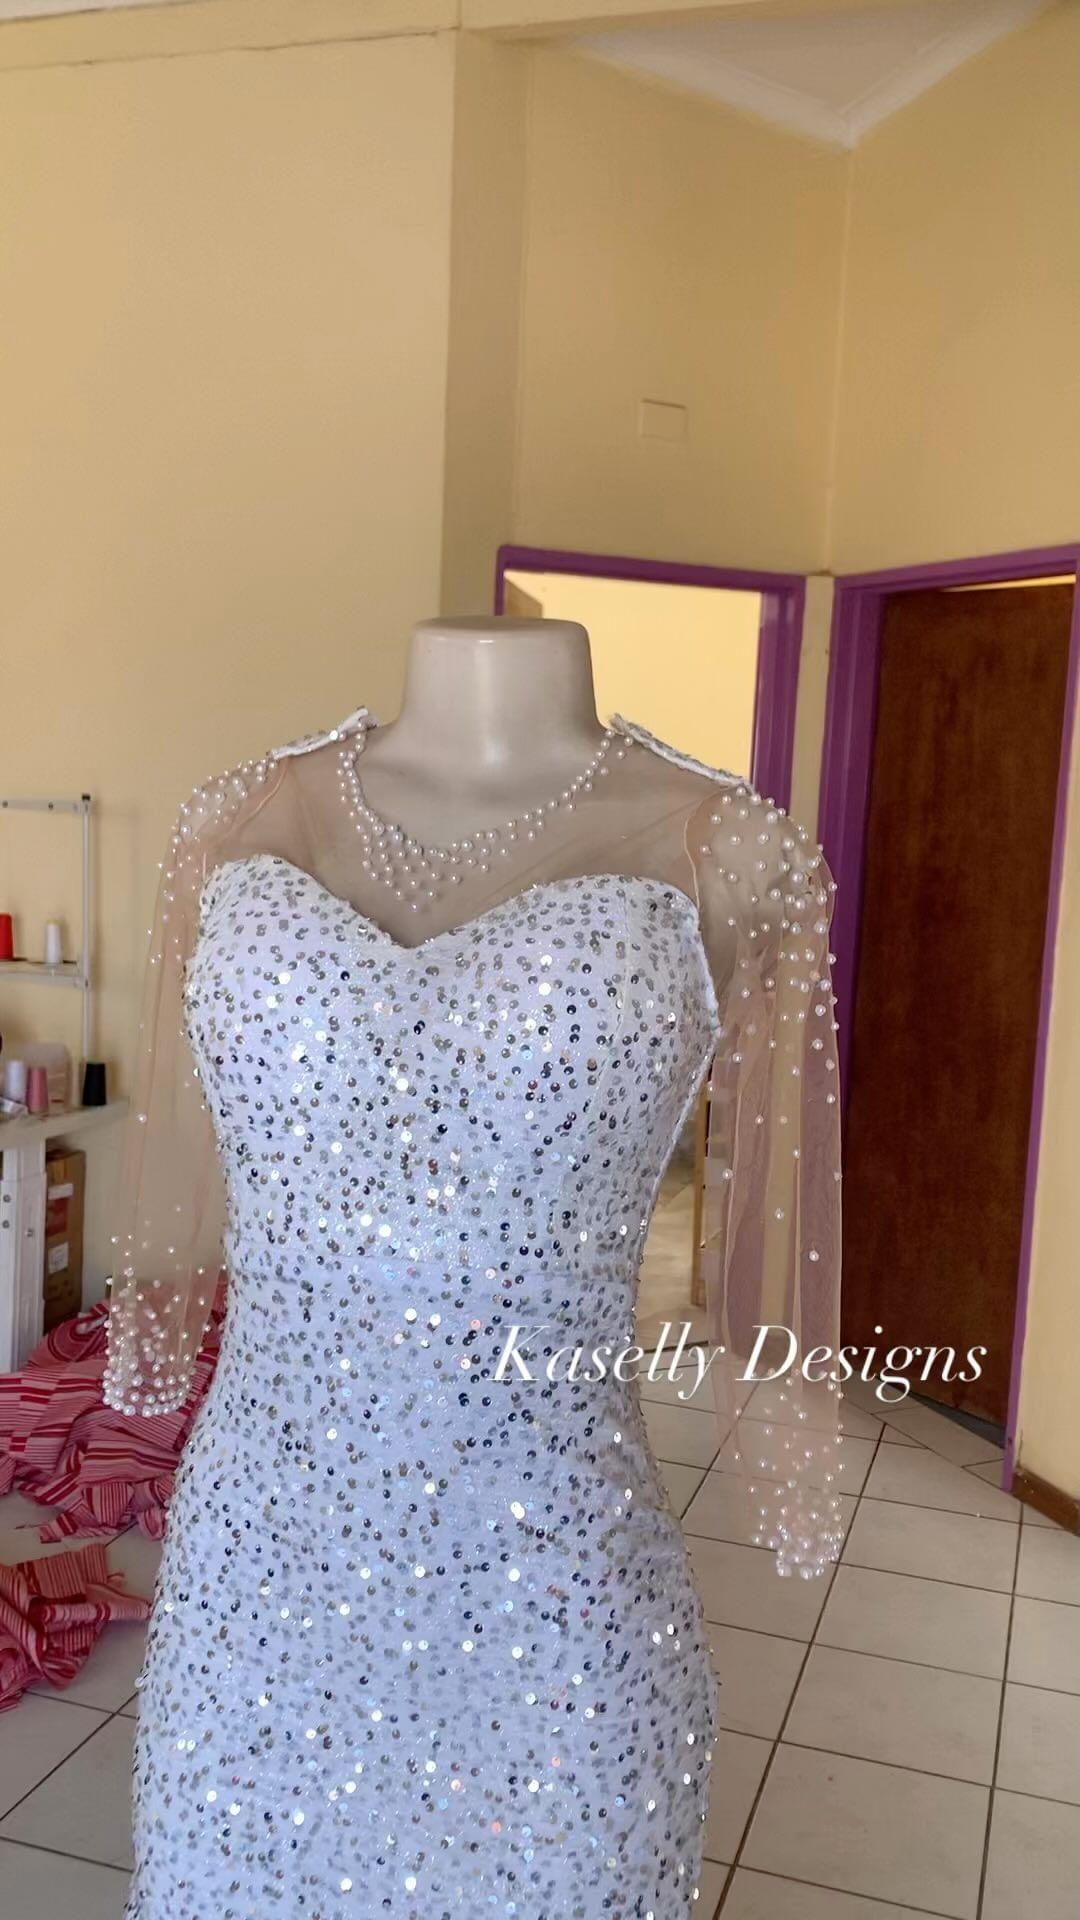 class="content__text"
 Another Bride slayed in Kaselly Designs. 🥰🥰🥰🥰❤️💕Uploading the look on @kaselly_designs_cc soon. WhatsApp 0815699915 from the 1st February for quotations 🙏🏽 
 